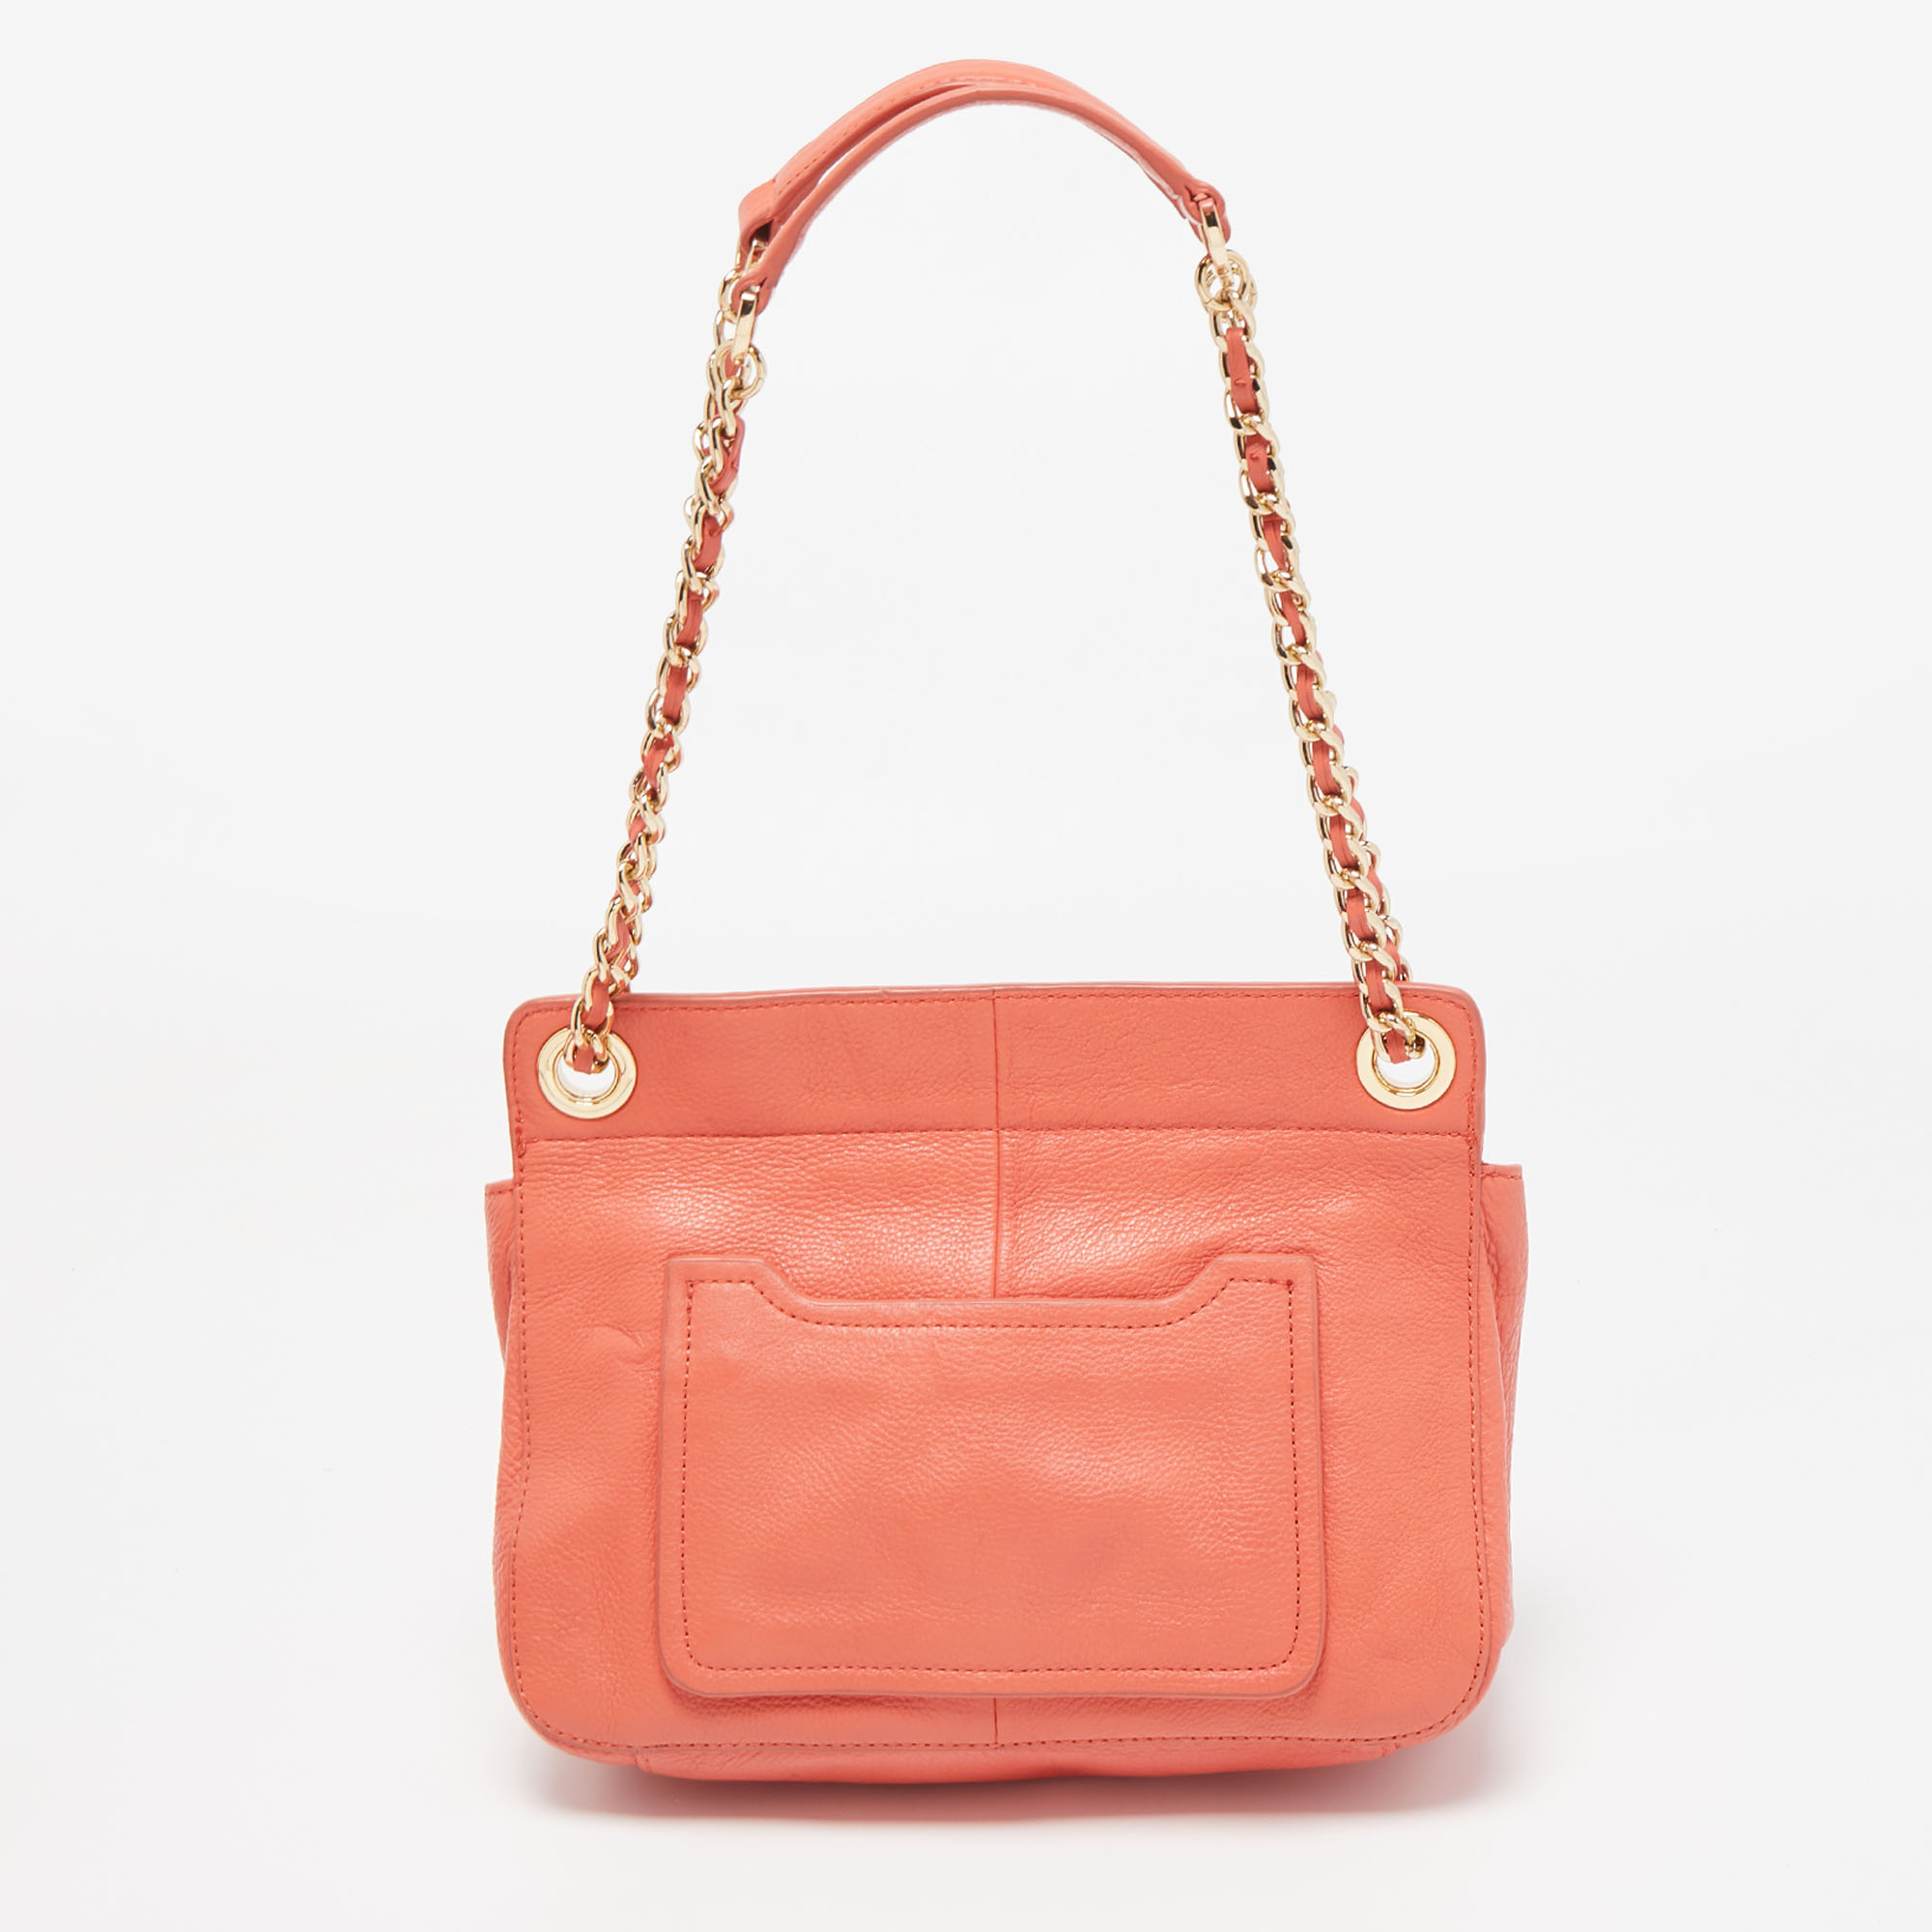 Tory Burch Peach Leather Marion Shoulder Bag